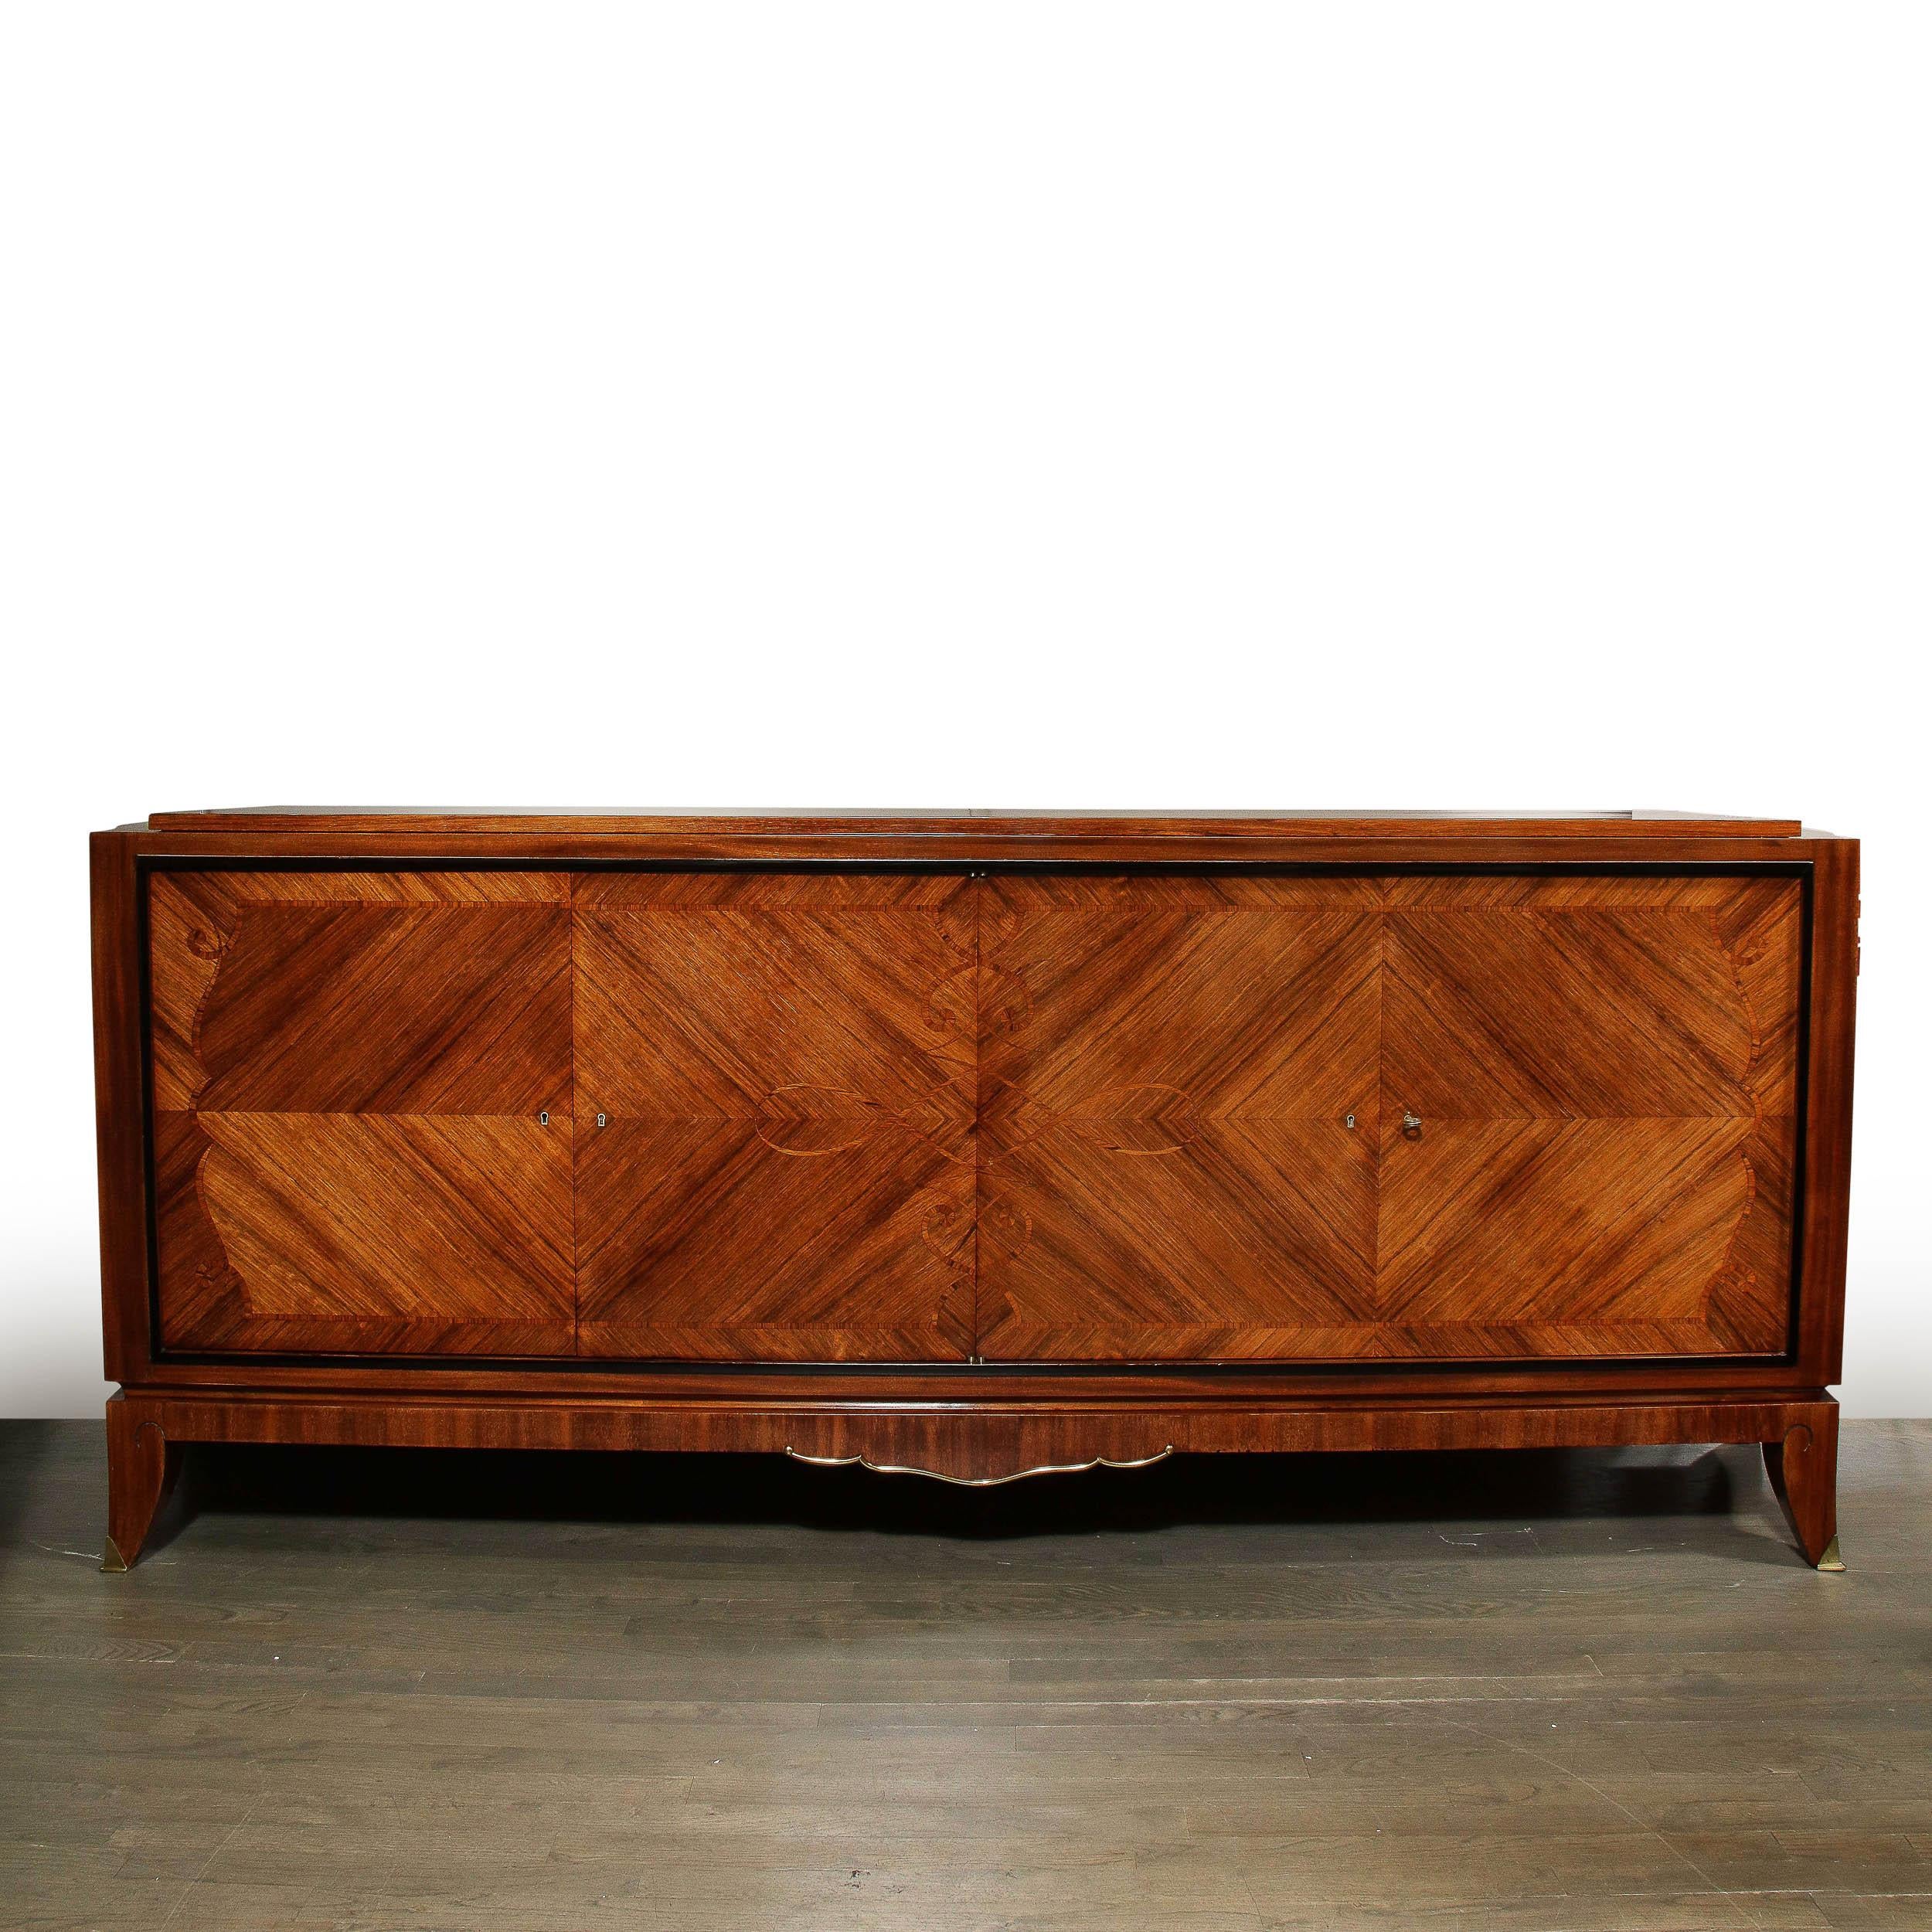 This French Art Deco sideboard was realized in France circa 1940. It features a volumetric rectangular body in bookmatched walnut and lacquer with truly world class marquetry throughout. Sitting on four stylized saber feet with gilded bronze sabots,